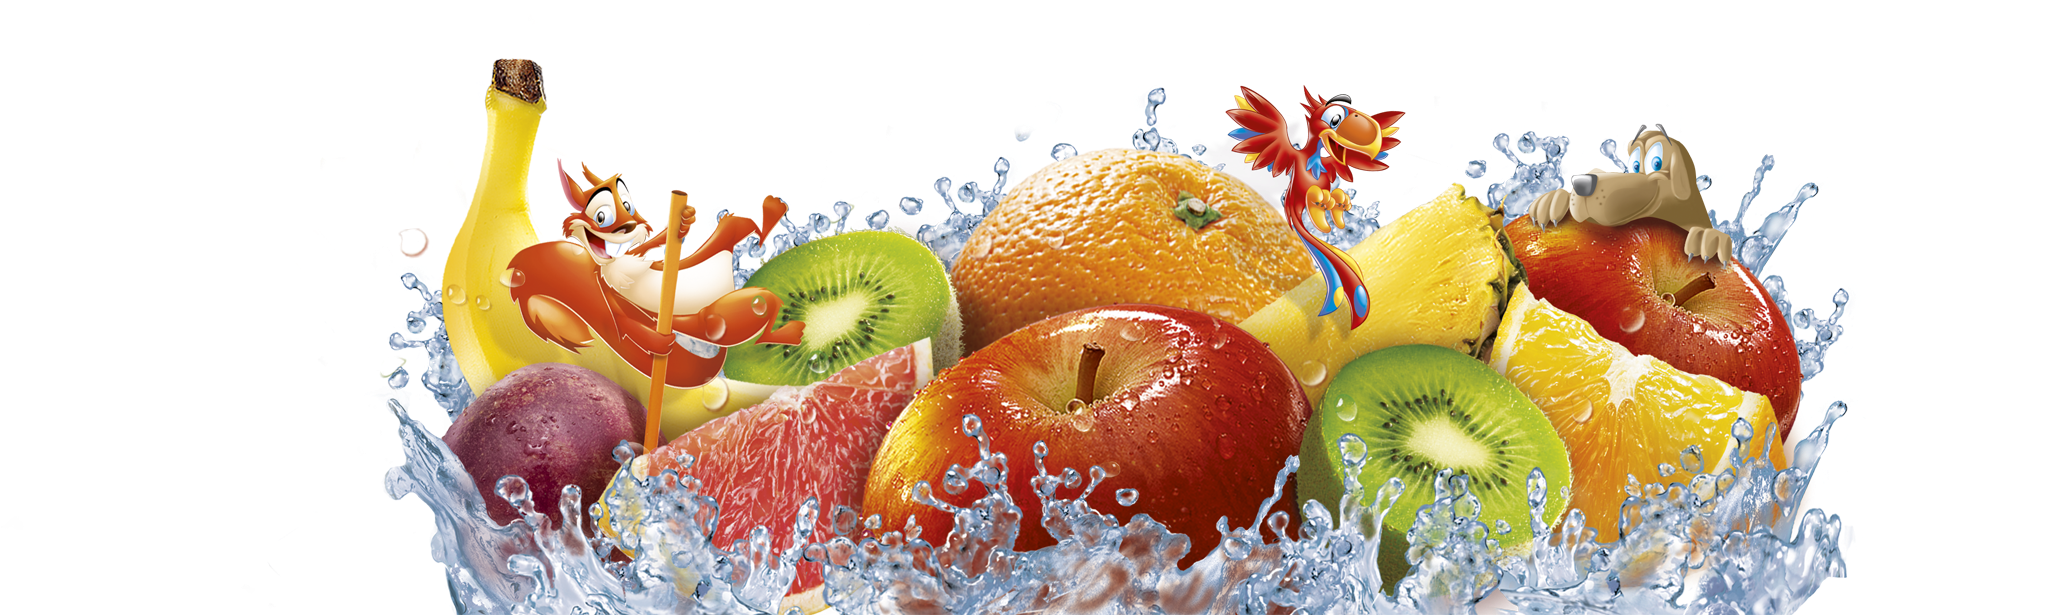 A Group Of Fruit In Water